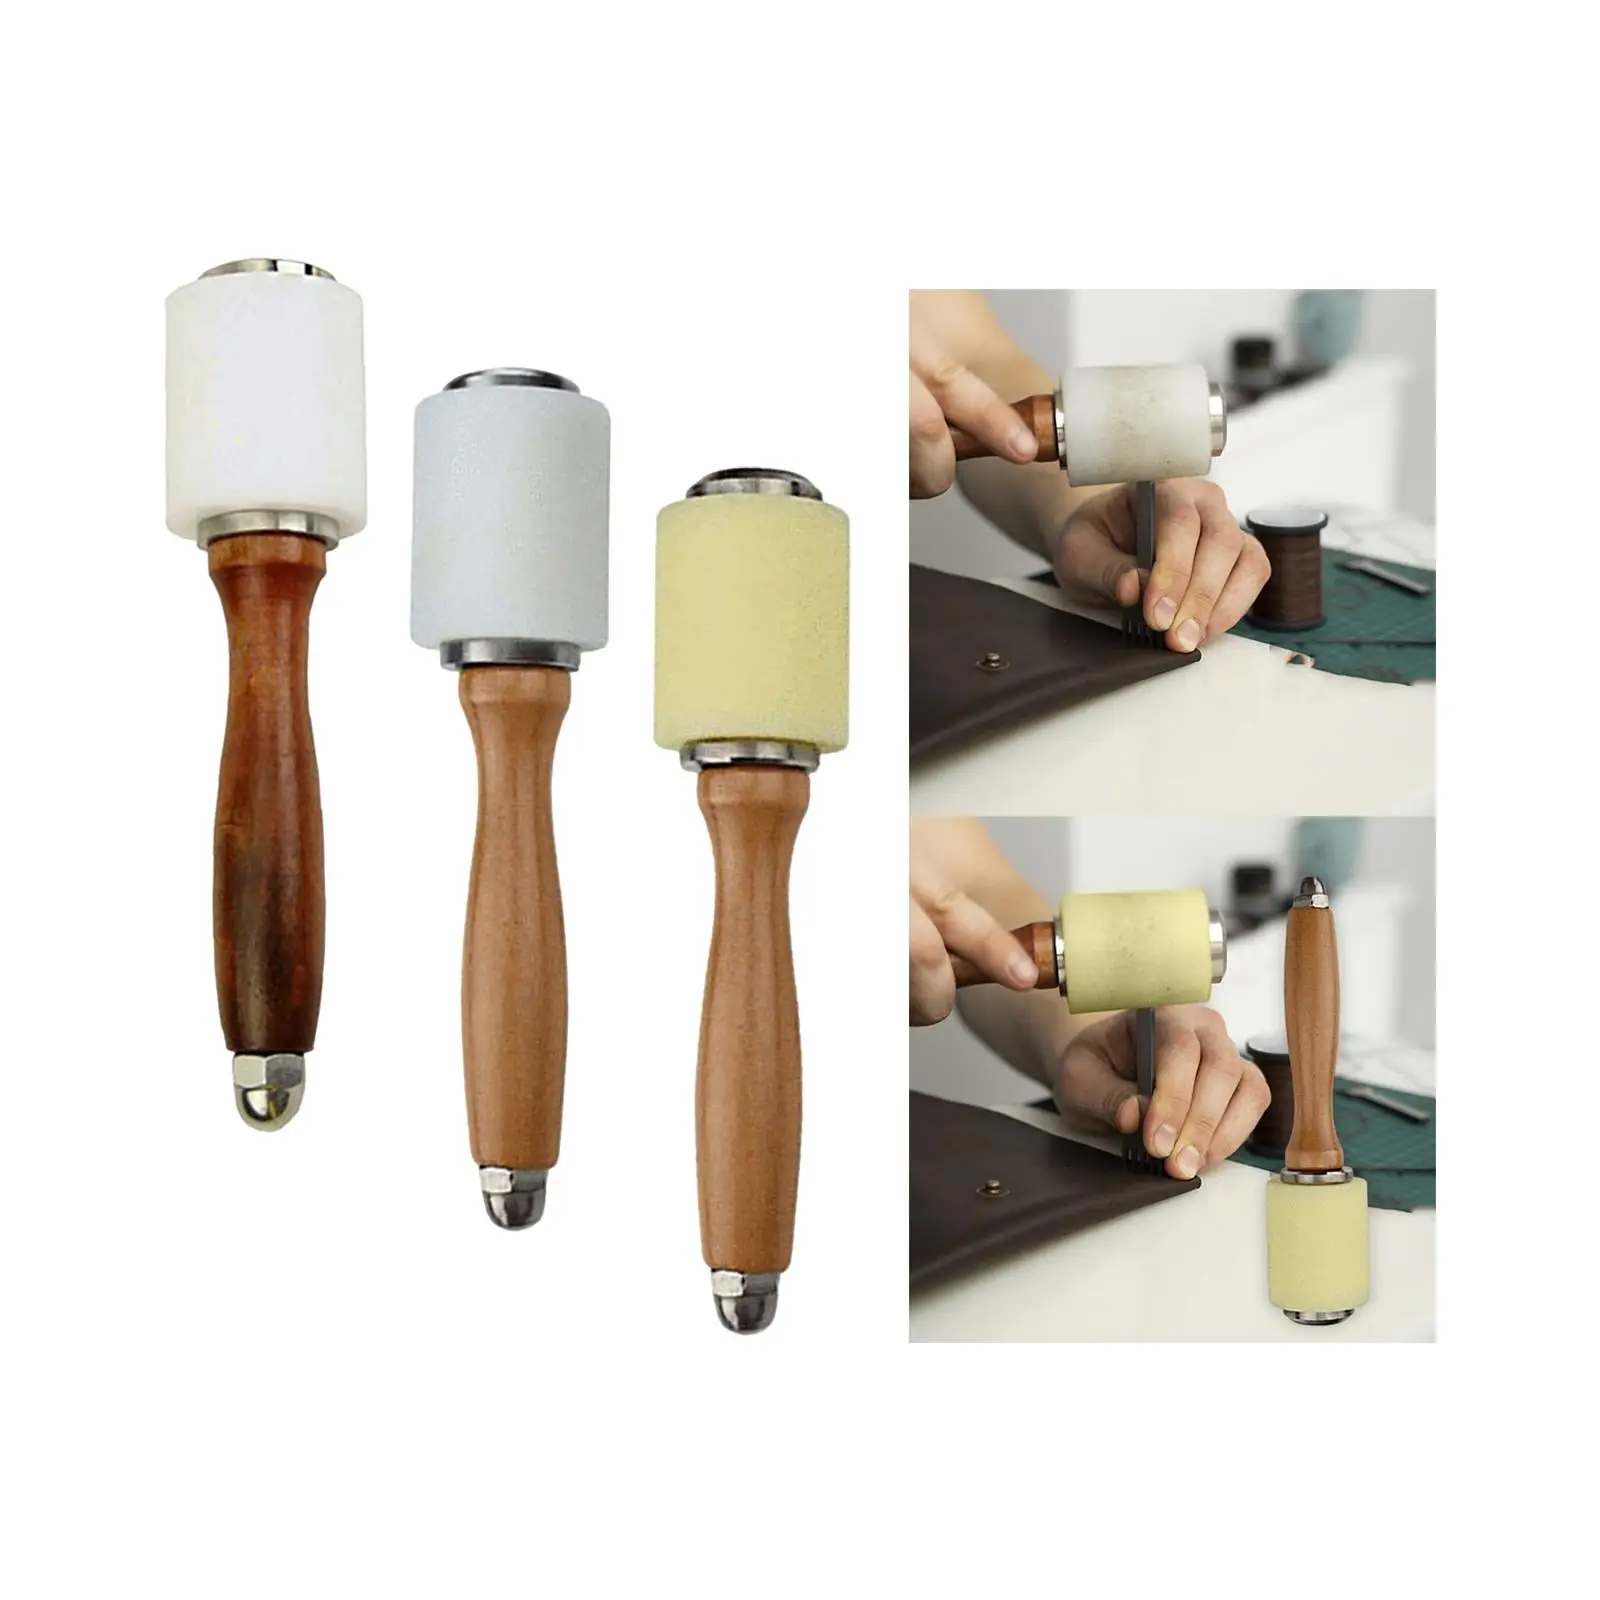 Punching Tool Wooden Handle Professional Pressure Cutting DIY Craft Working